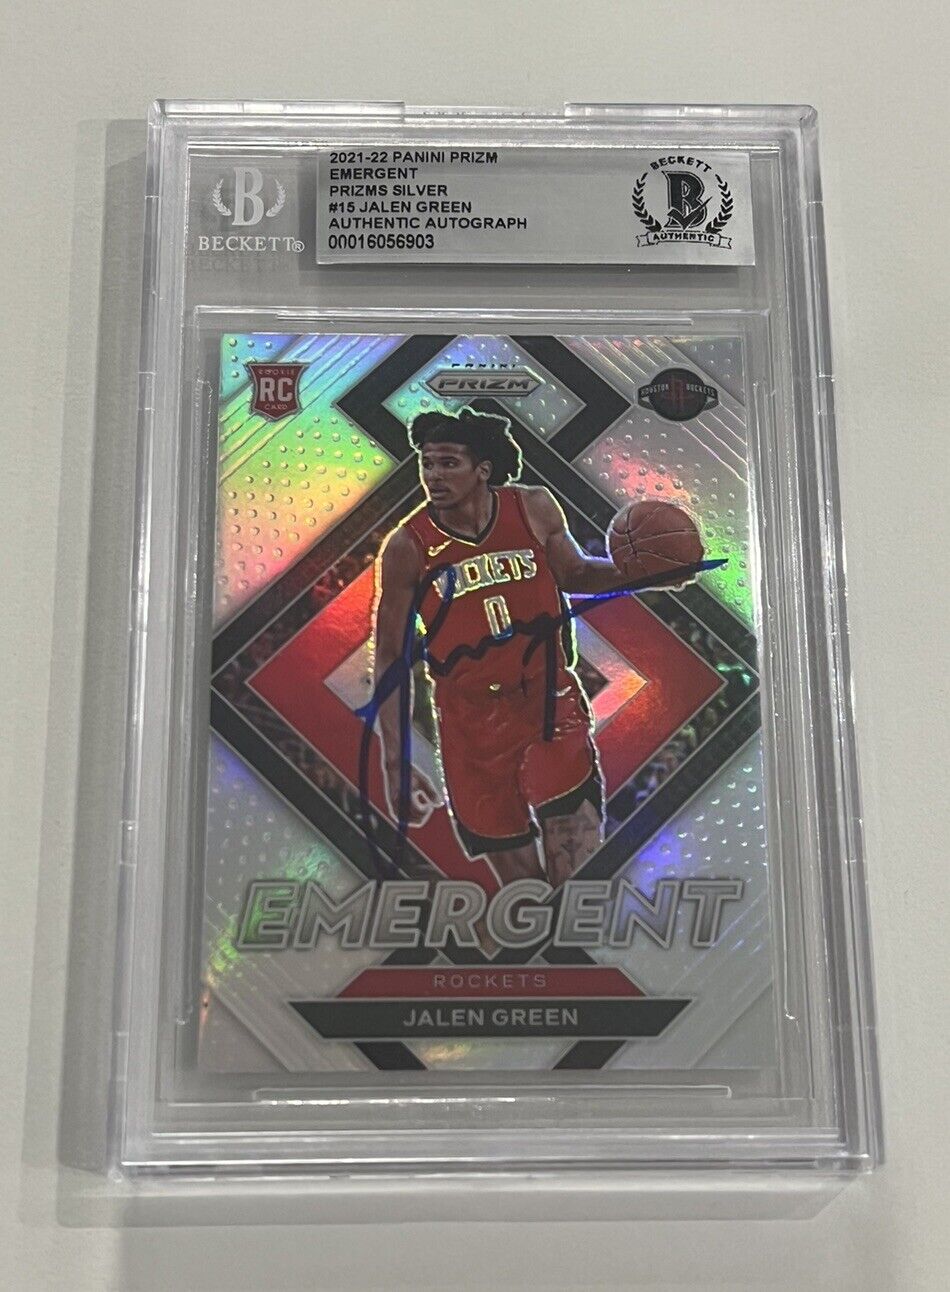 2020-21 JALEN GREEN PANINI PRIZMS SILVER EMERGING ROOKIE RC CARD #15 CAR BGS